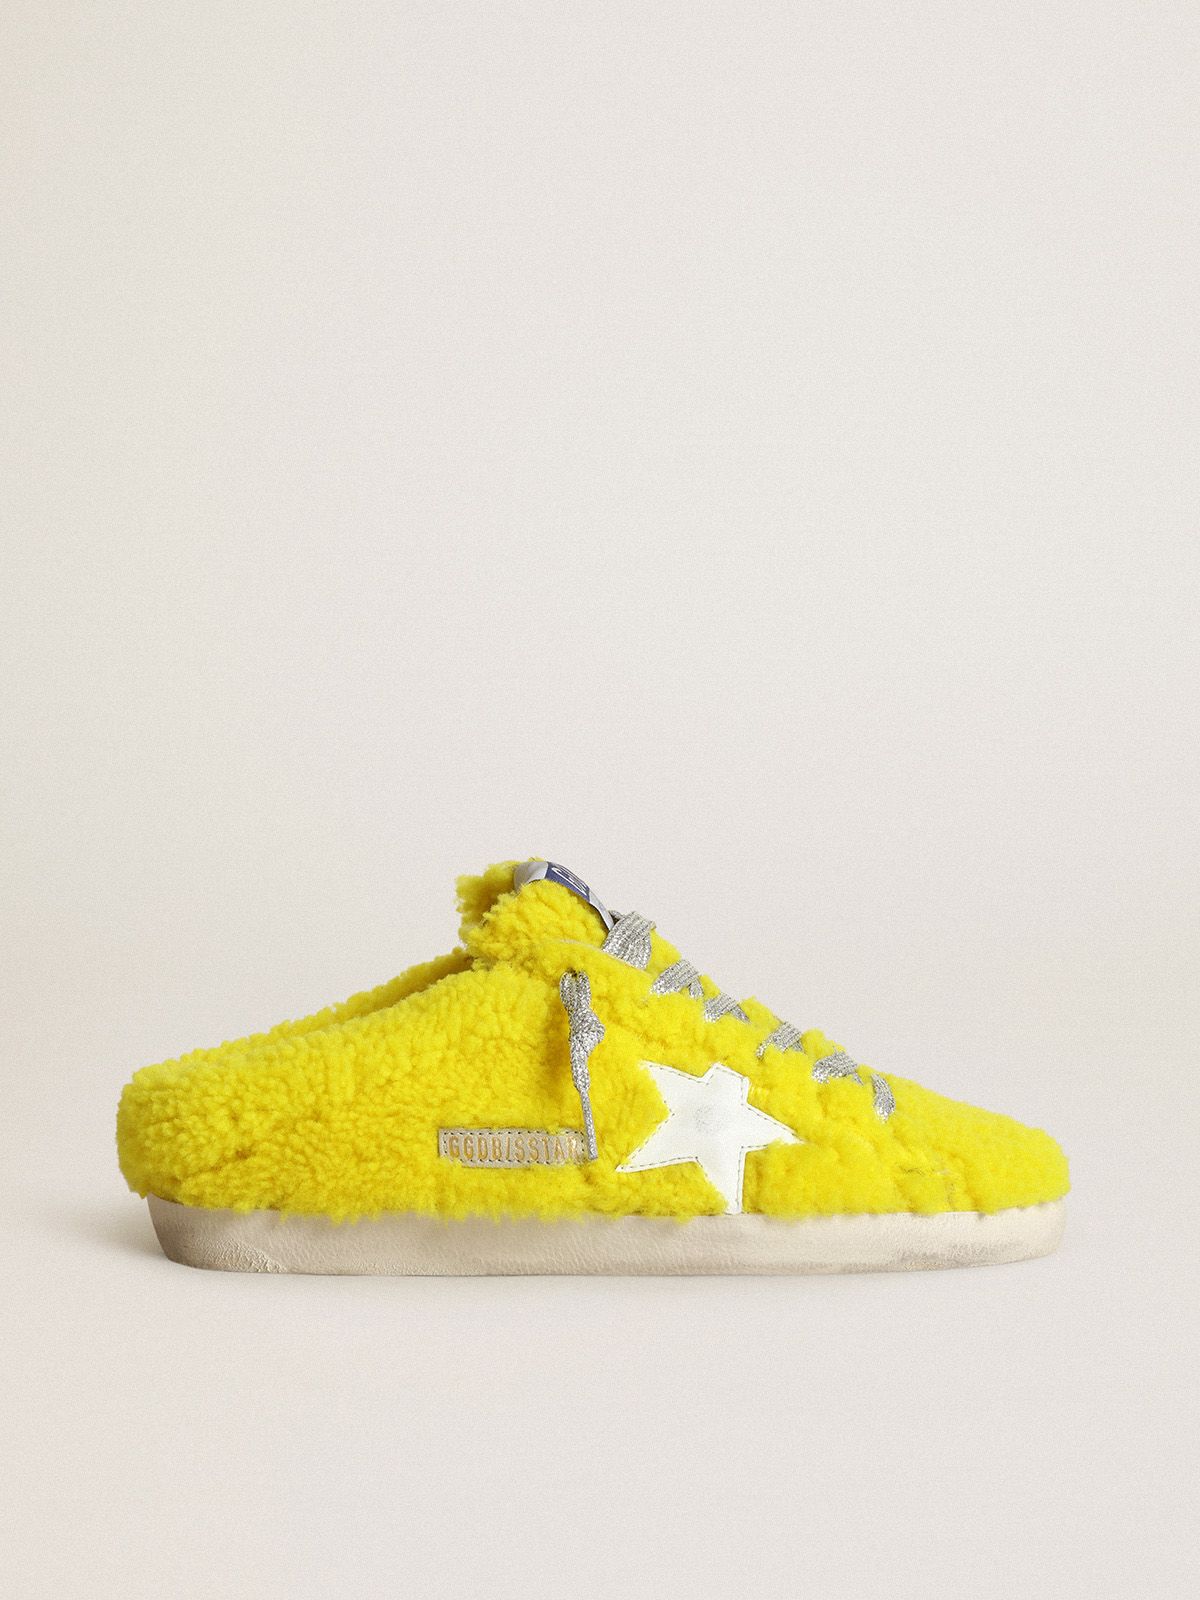 golden goose Sabots with fluorescent yellow in leather white star Super-Star shearling